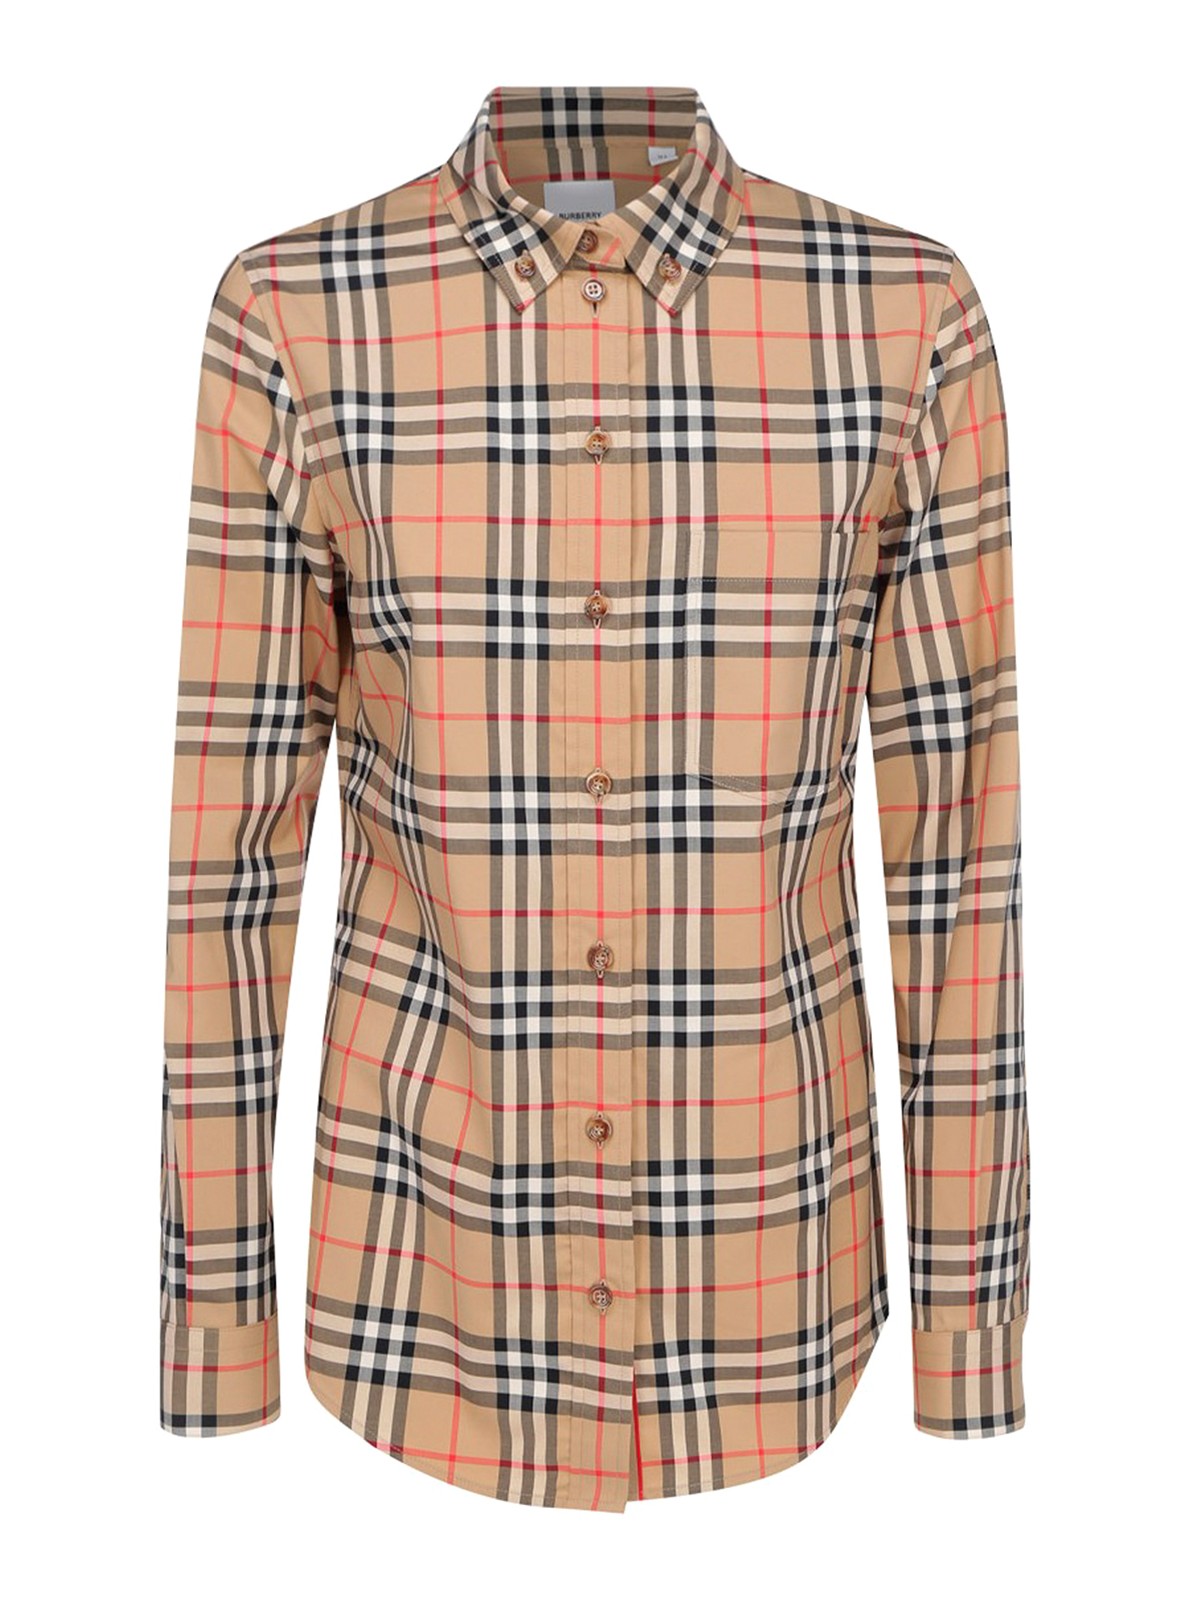 Shirts Burberry - Lapwing shirt - 8022284 | Shop online at THEBS